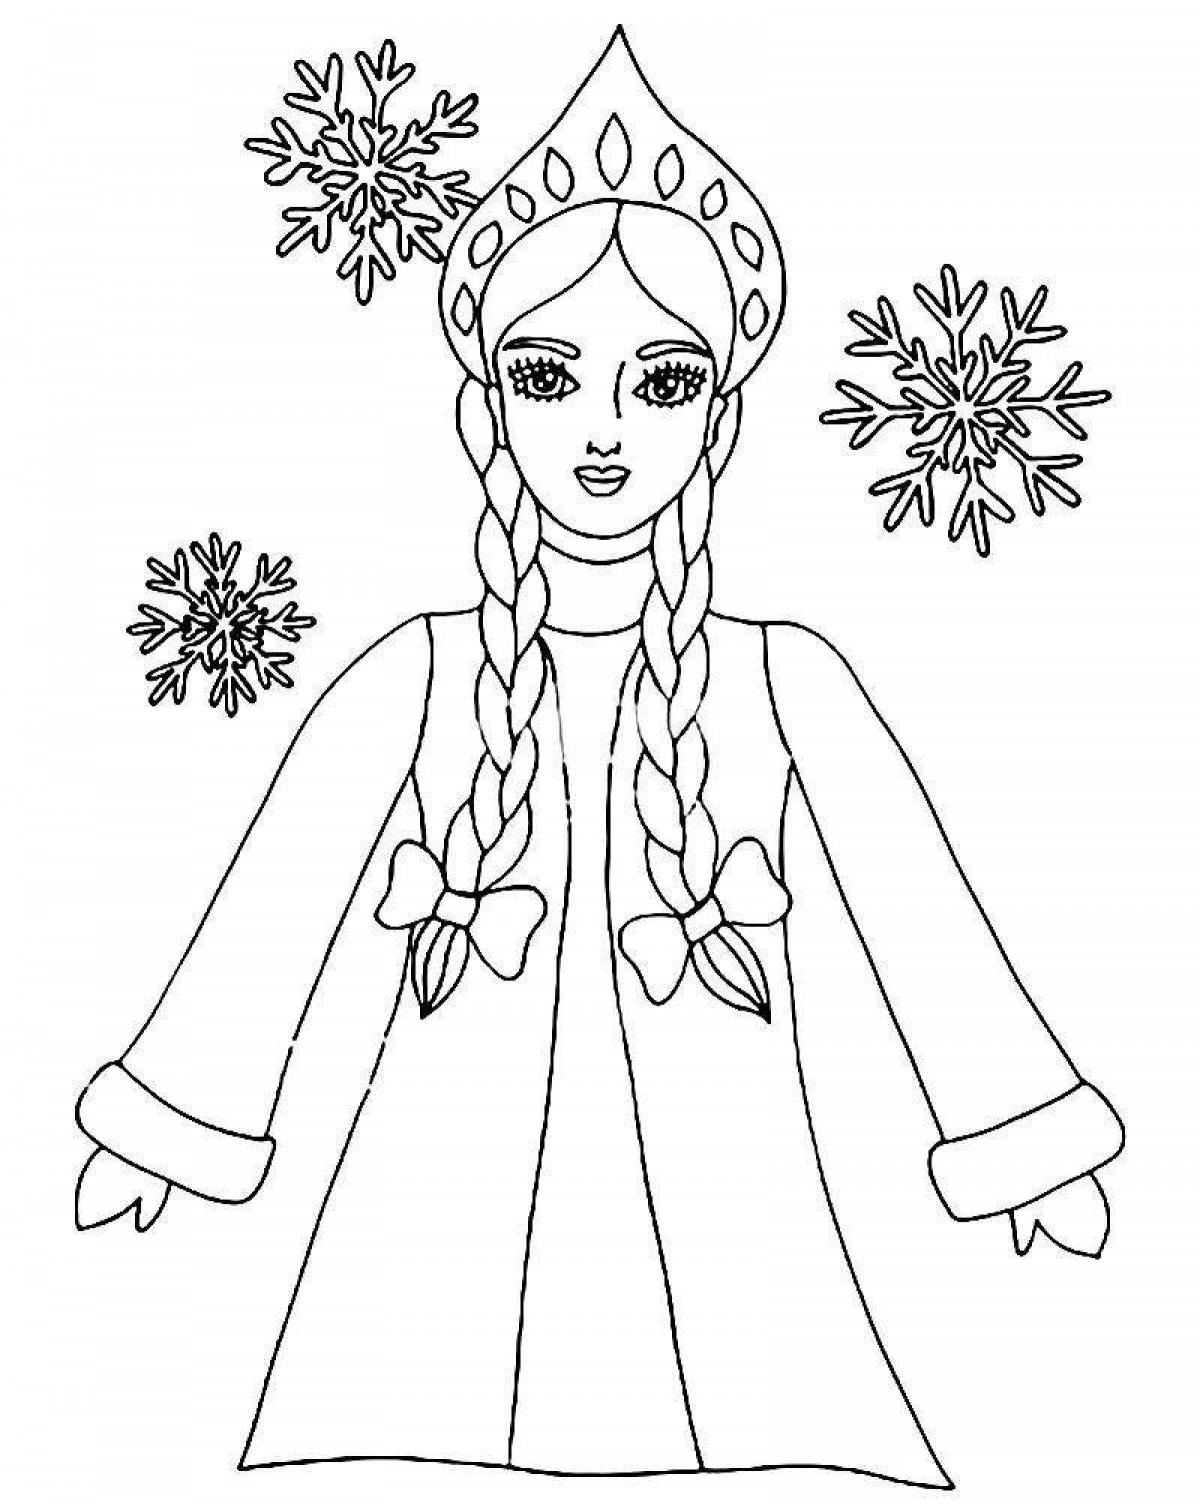 Coloring the face of a glamorous snow maiden